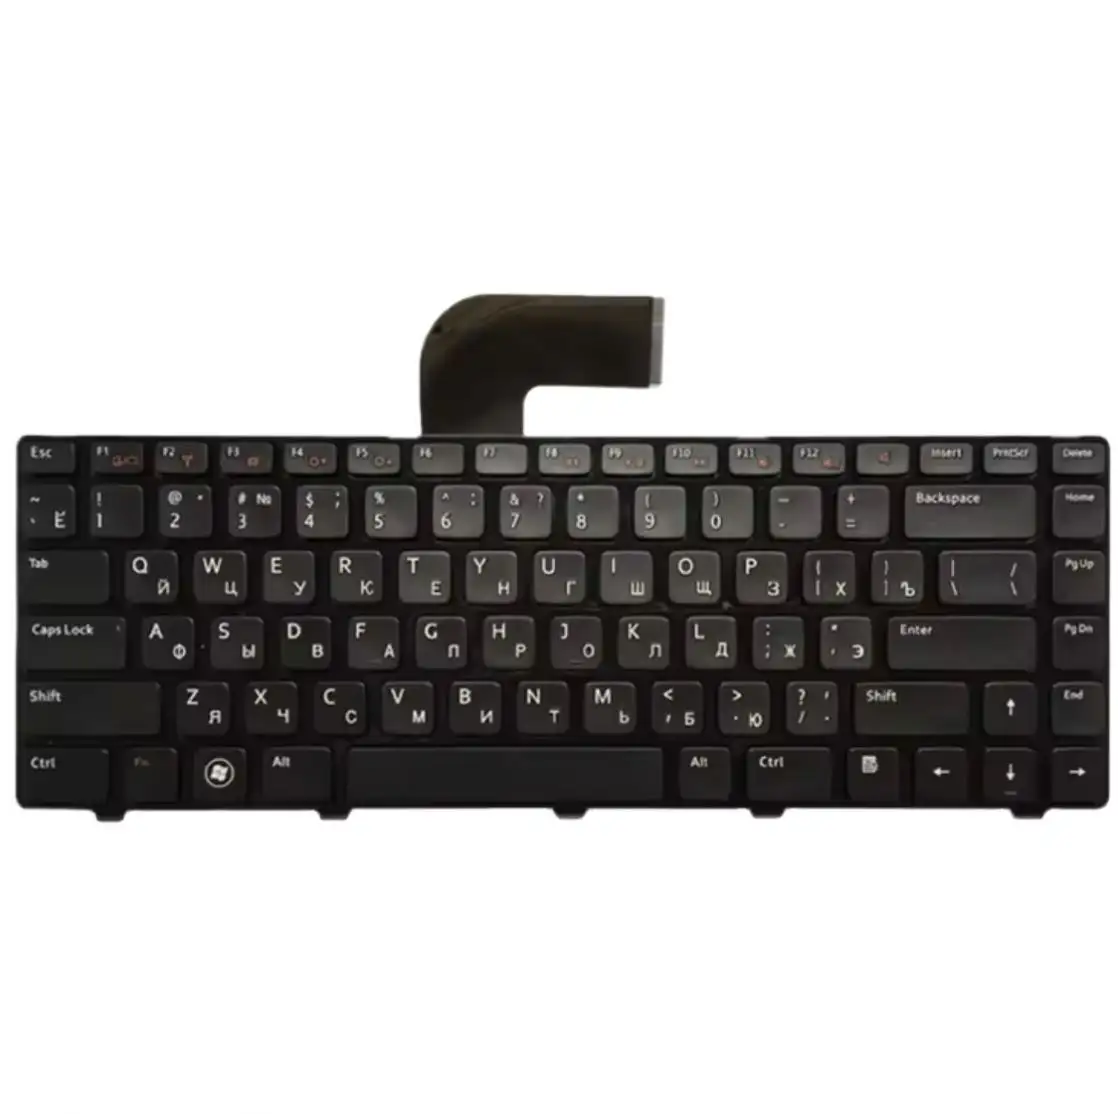 Hot Selling laptop Keyboard for DELL Inspiron 14R N4110 M4110 N4050 M4040 N5050 M5050 M5040